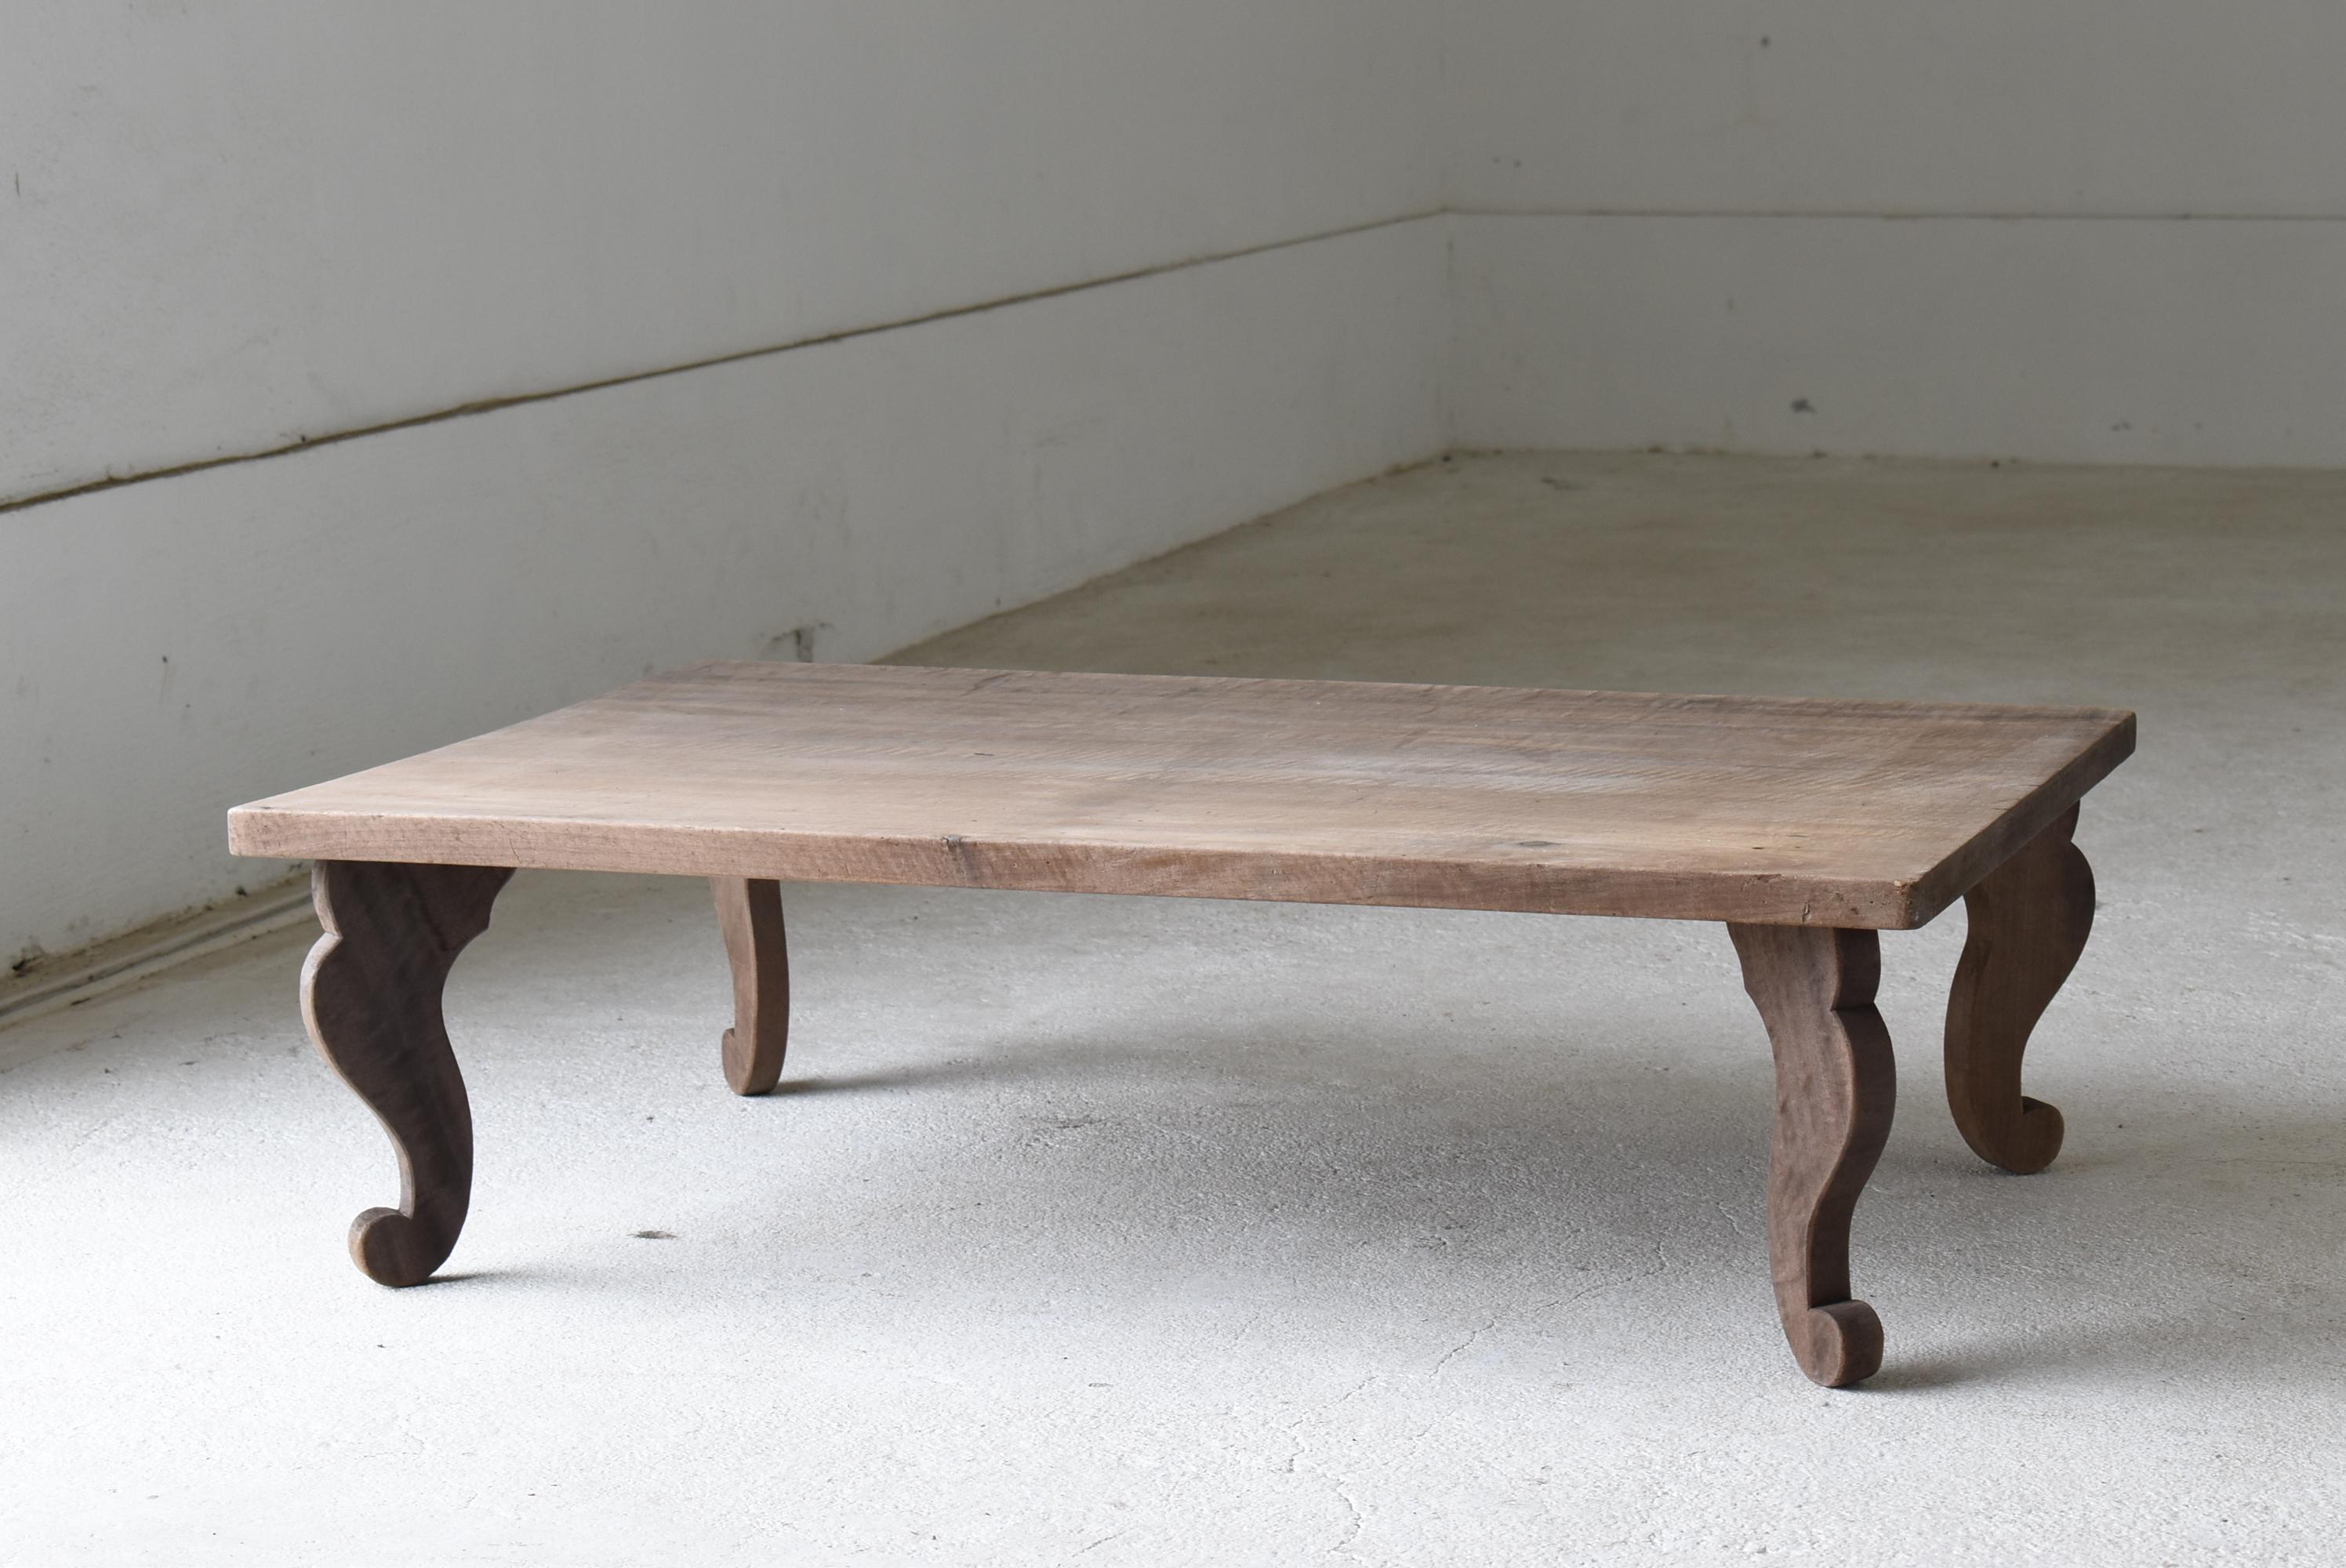 This is an old Japanese low table.
This furniture is from the Meiji period (1860s-1920s).
The legs can be removed for convenient movement.
It is a rare piece of furniture.

It is made of a wood called 